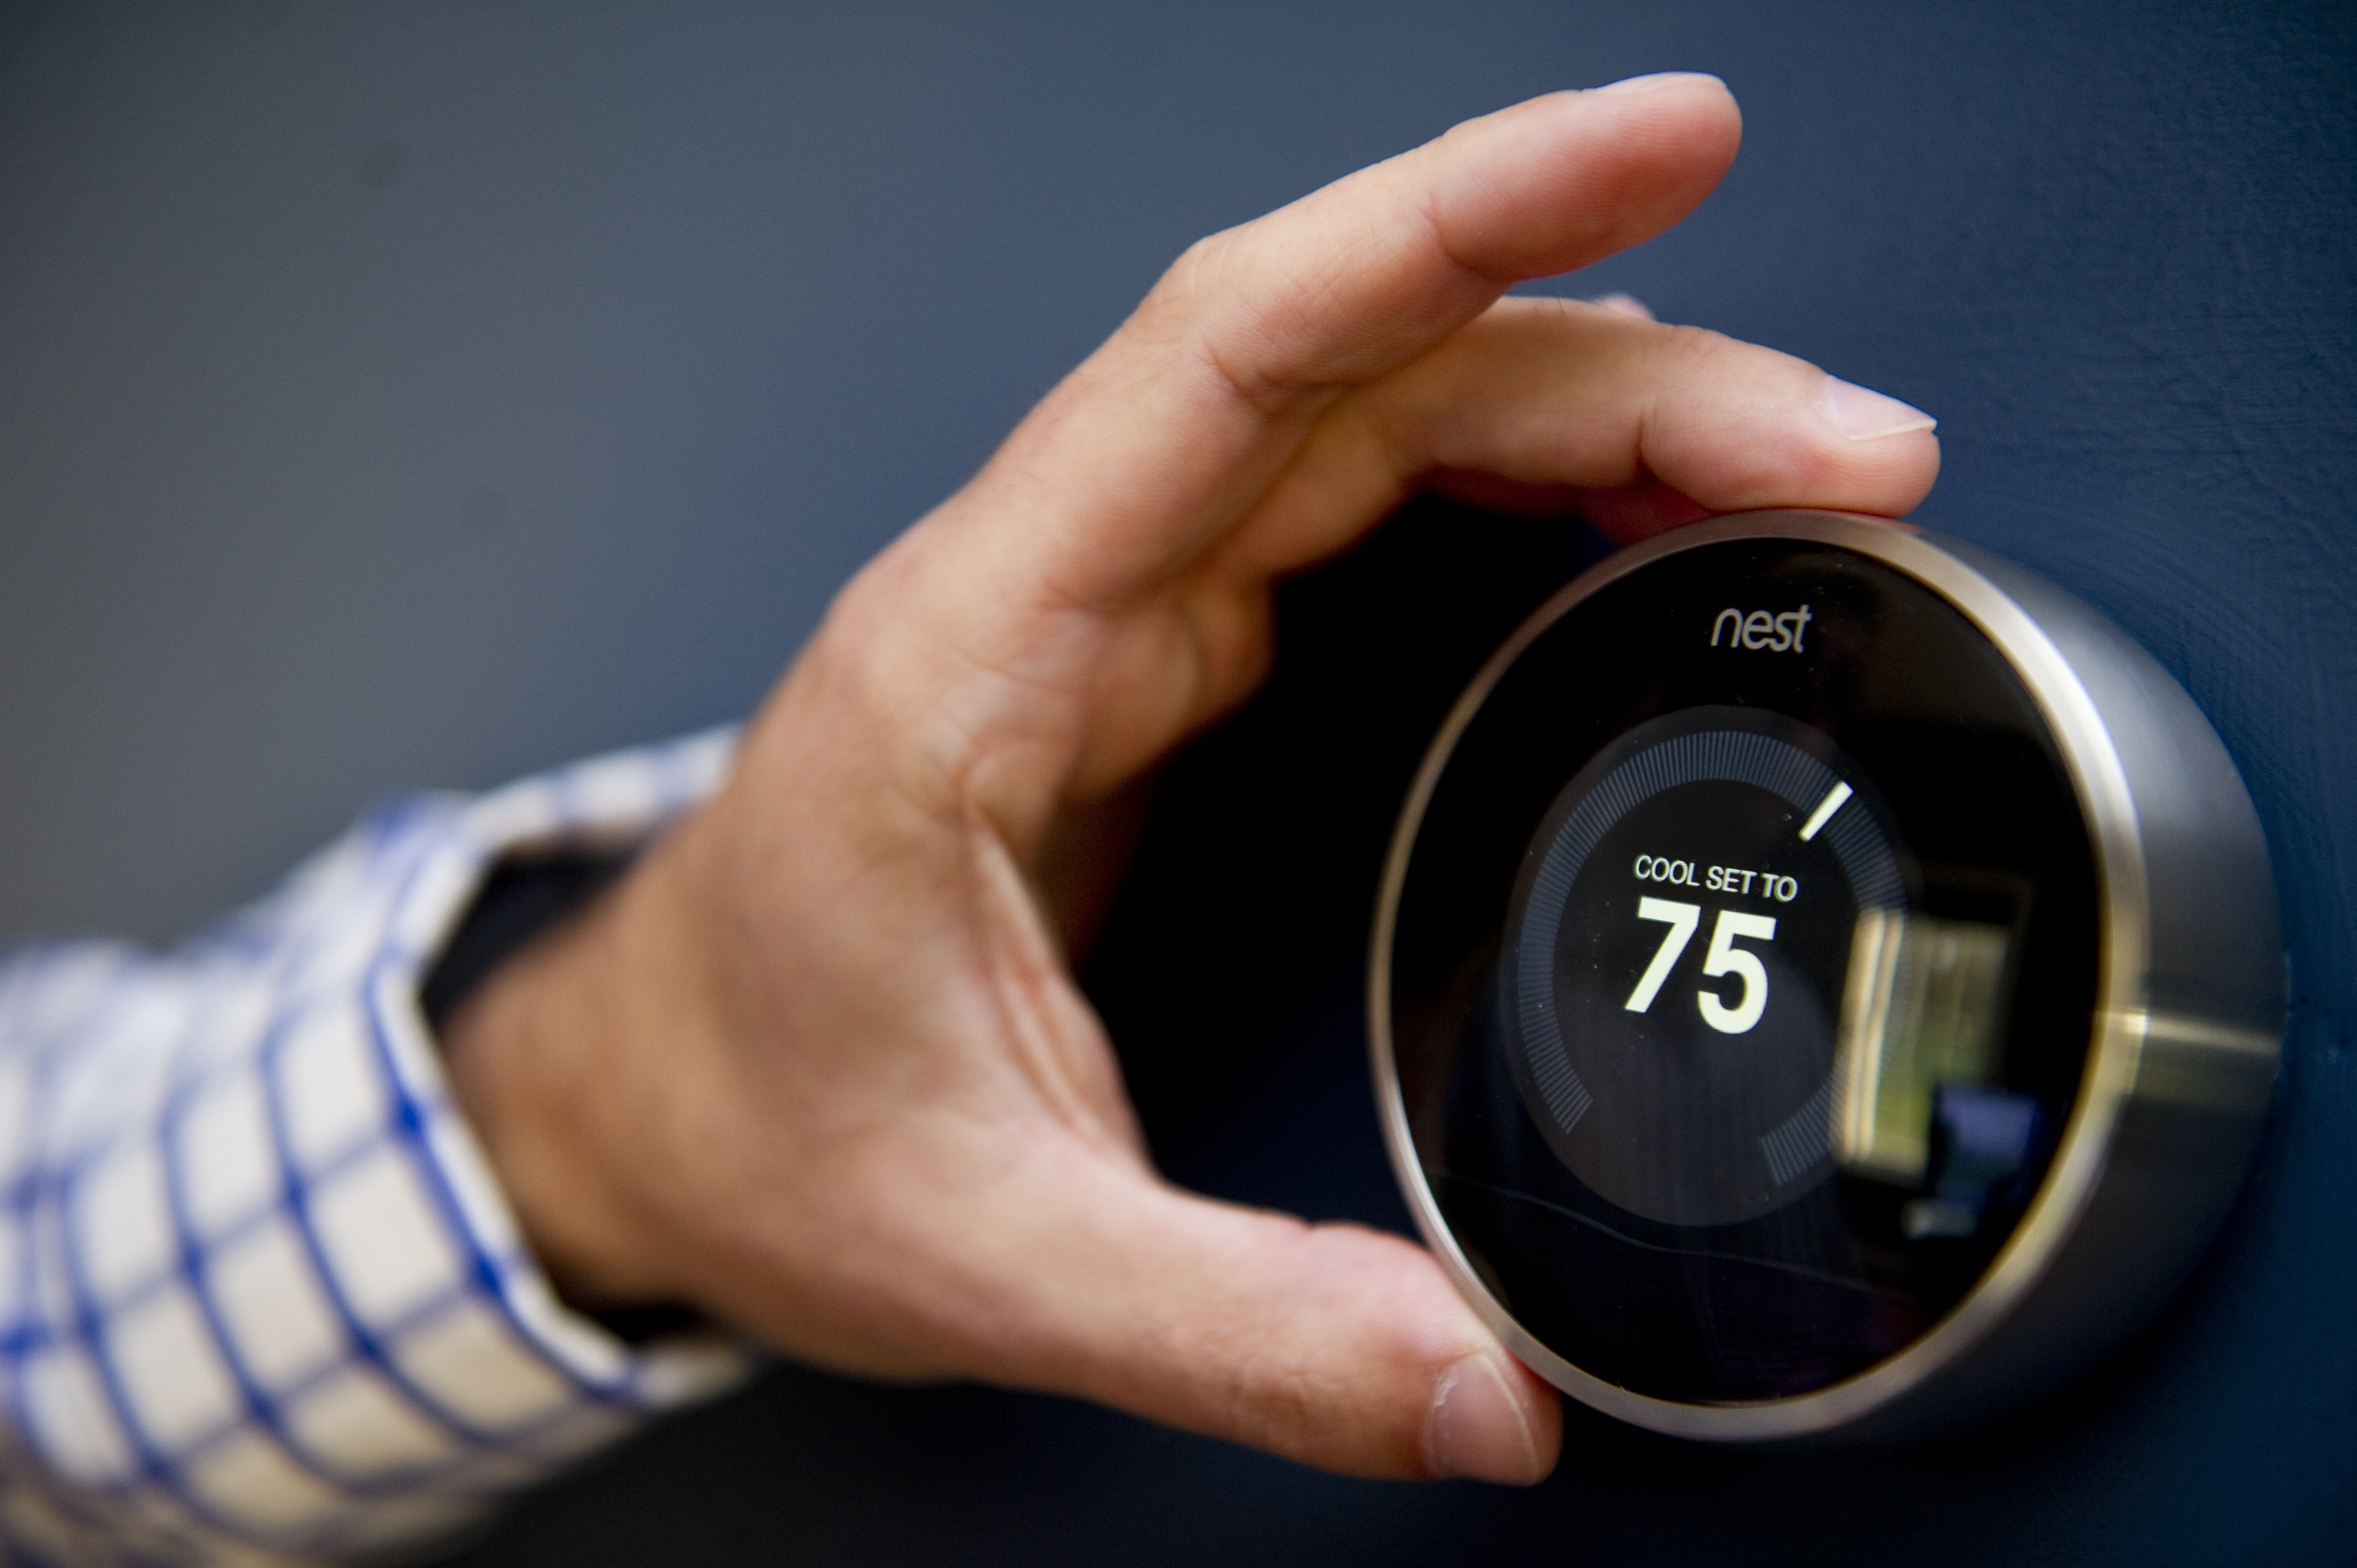 Nick DeLena adjusts his thermostat from Nest Labs in his home on August 12, 2013 in West Newbury, Massachusetts. (Christian Science Monitor&mdash;Christian Science Monitor/Getty)